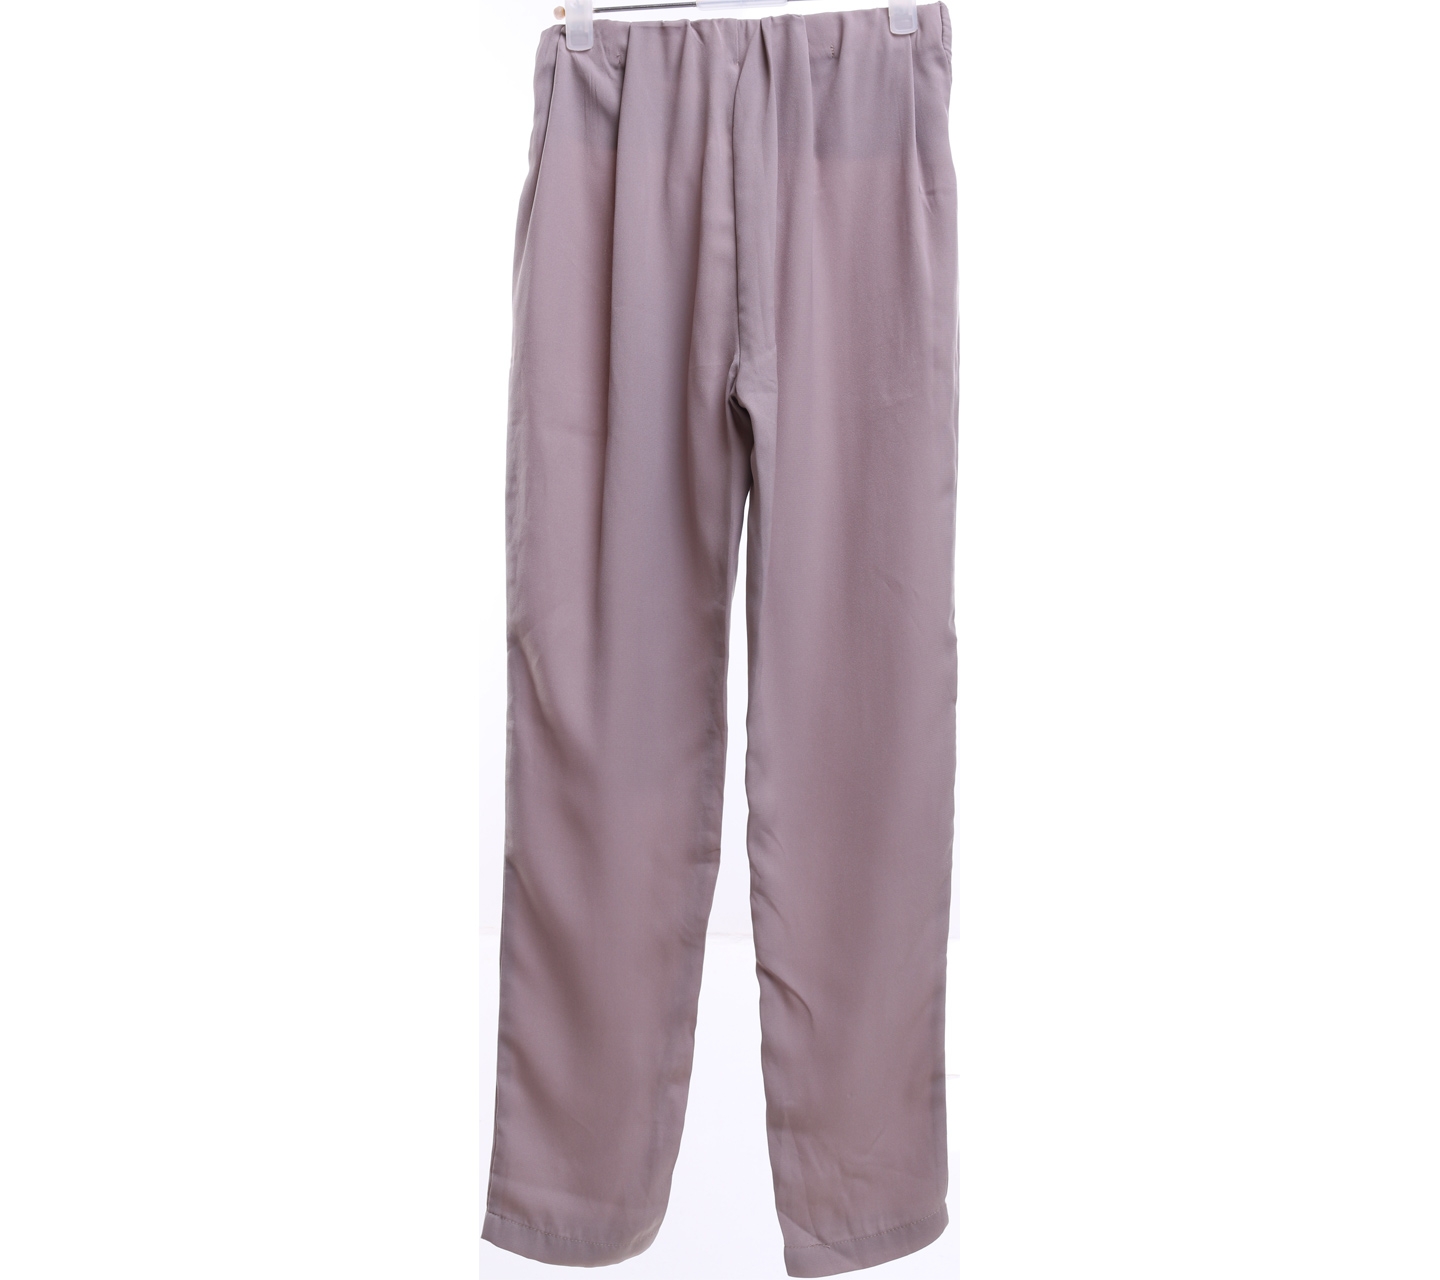 Gauid Taupe with Tie Long Pants